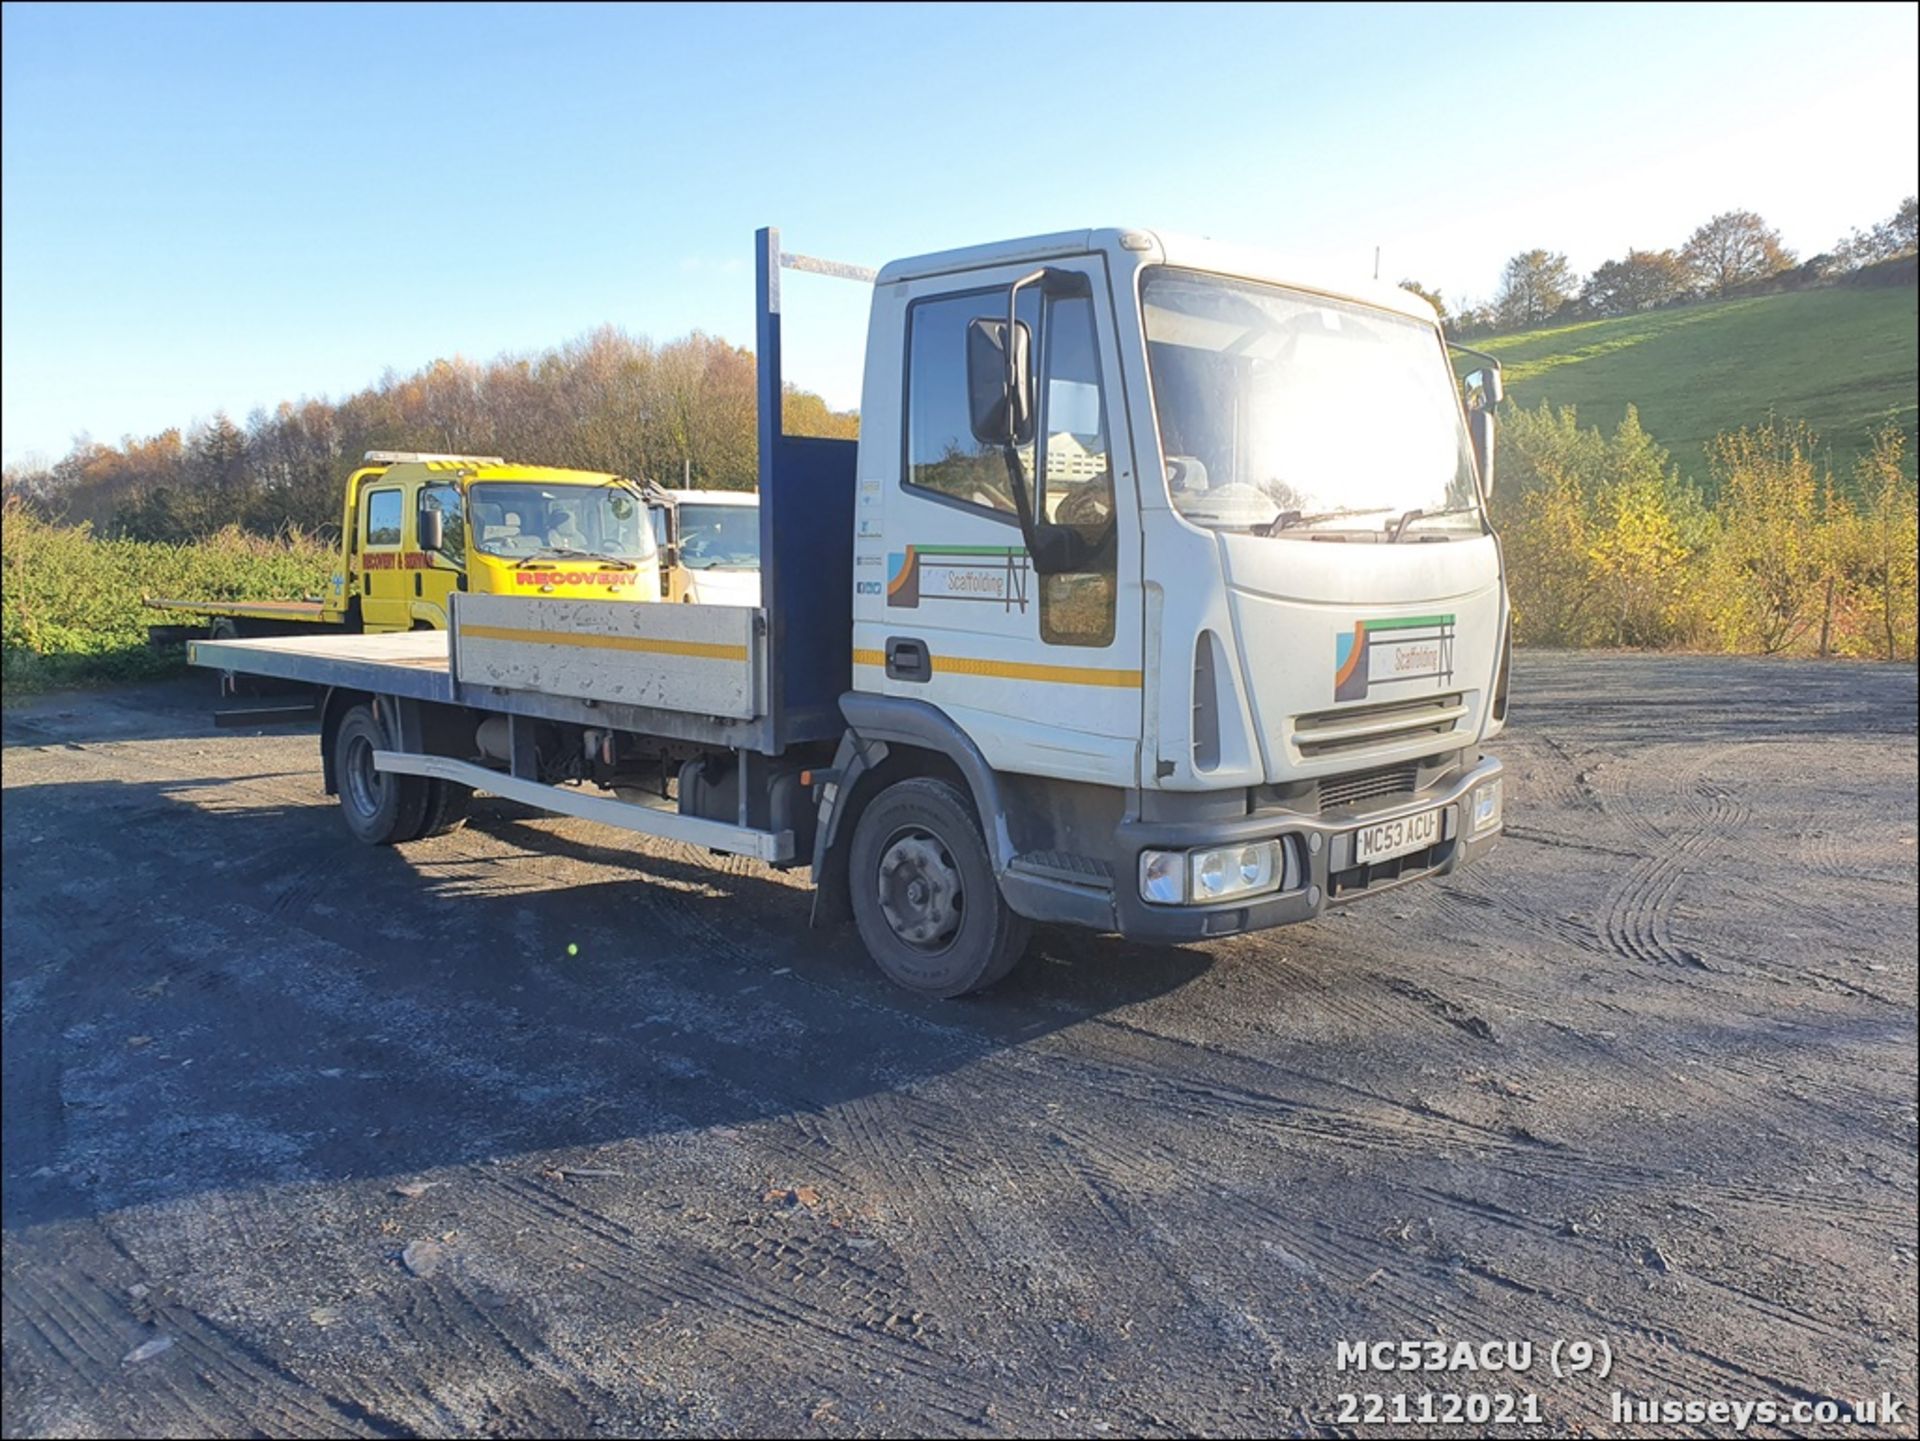 04/53 IVECO-FORD - 3920cc 2dr Flat Bed (White, 178k) - Image 4 of 24